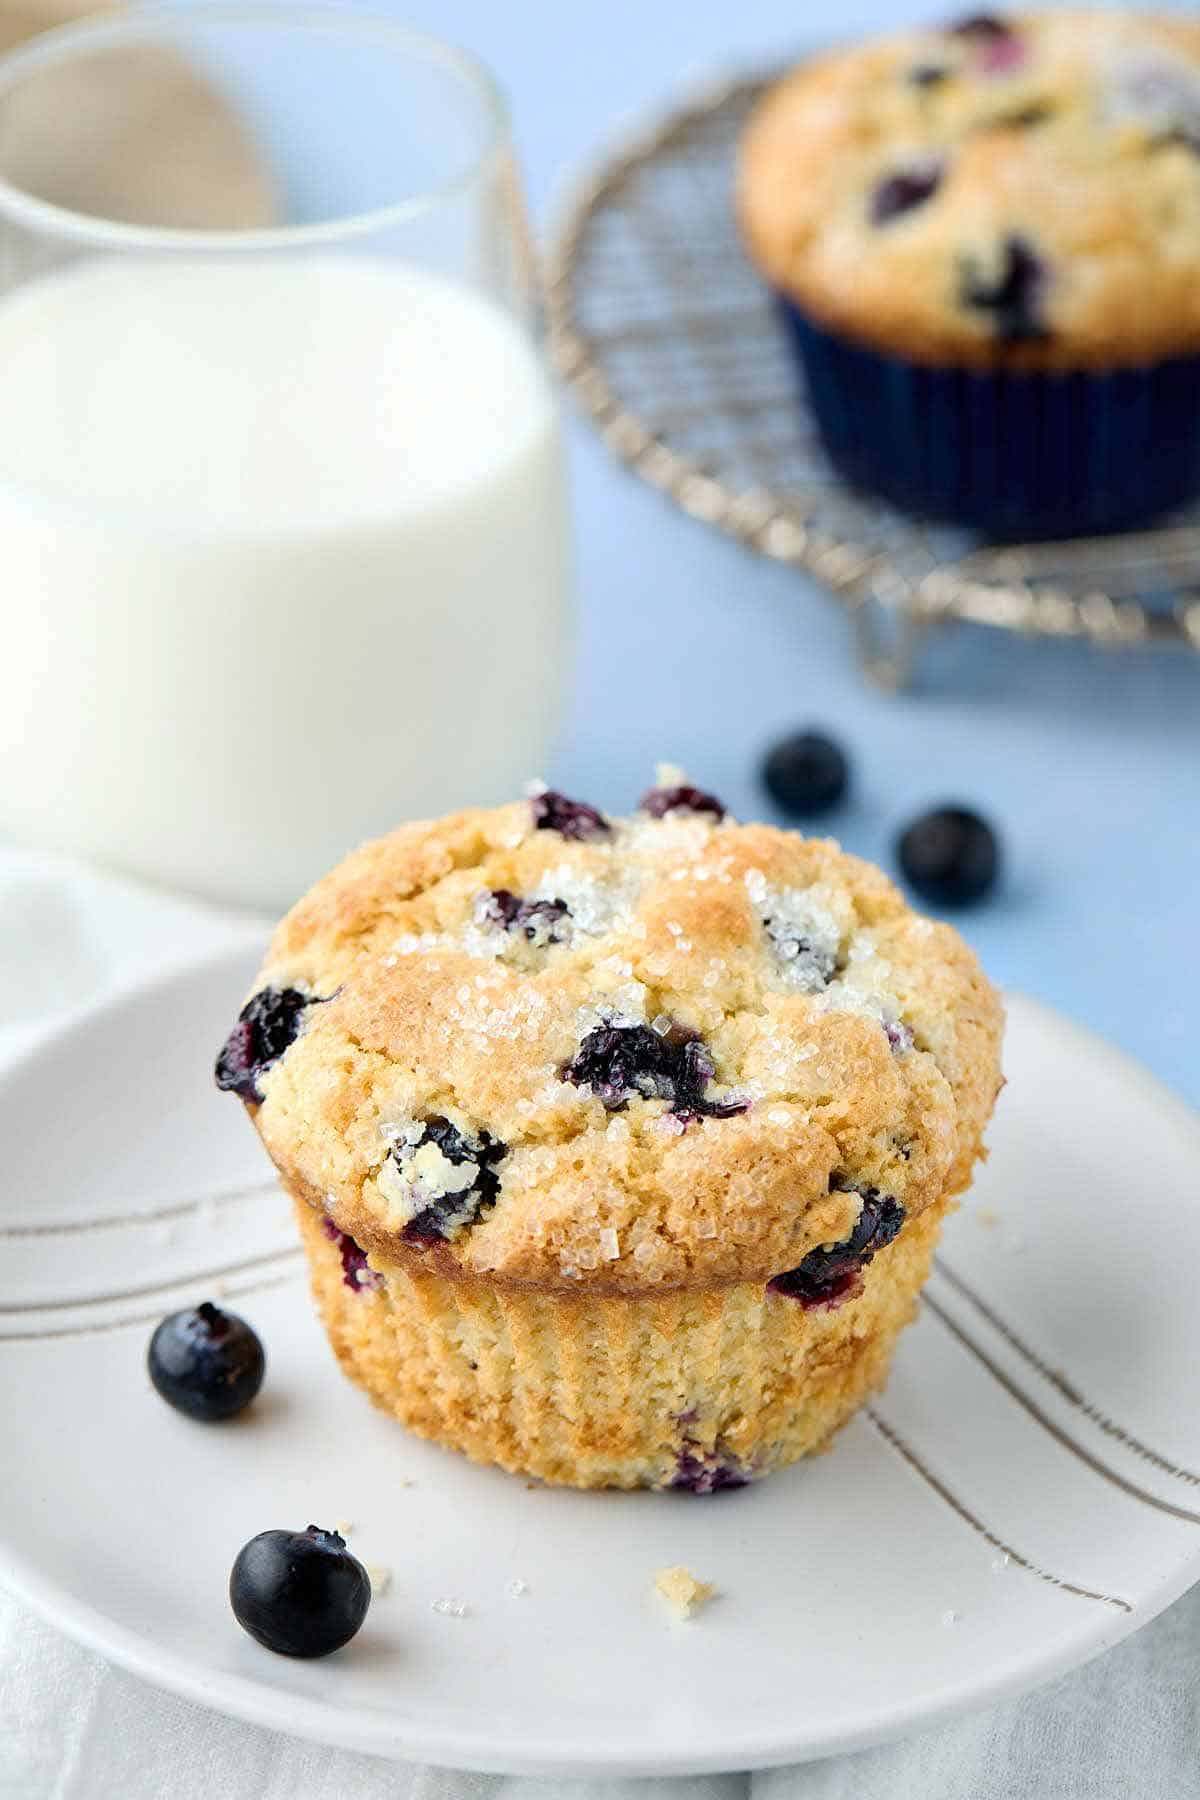 Buttermilk blueberry muffin on a plate with a glass of milk in the background.